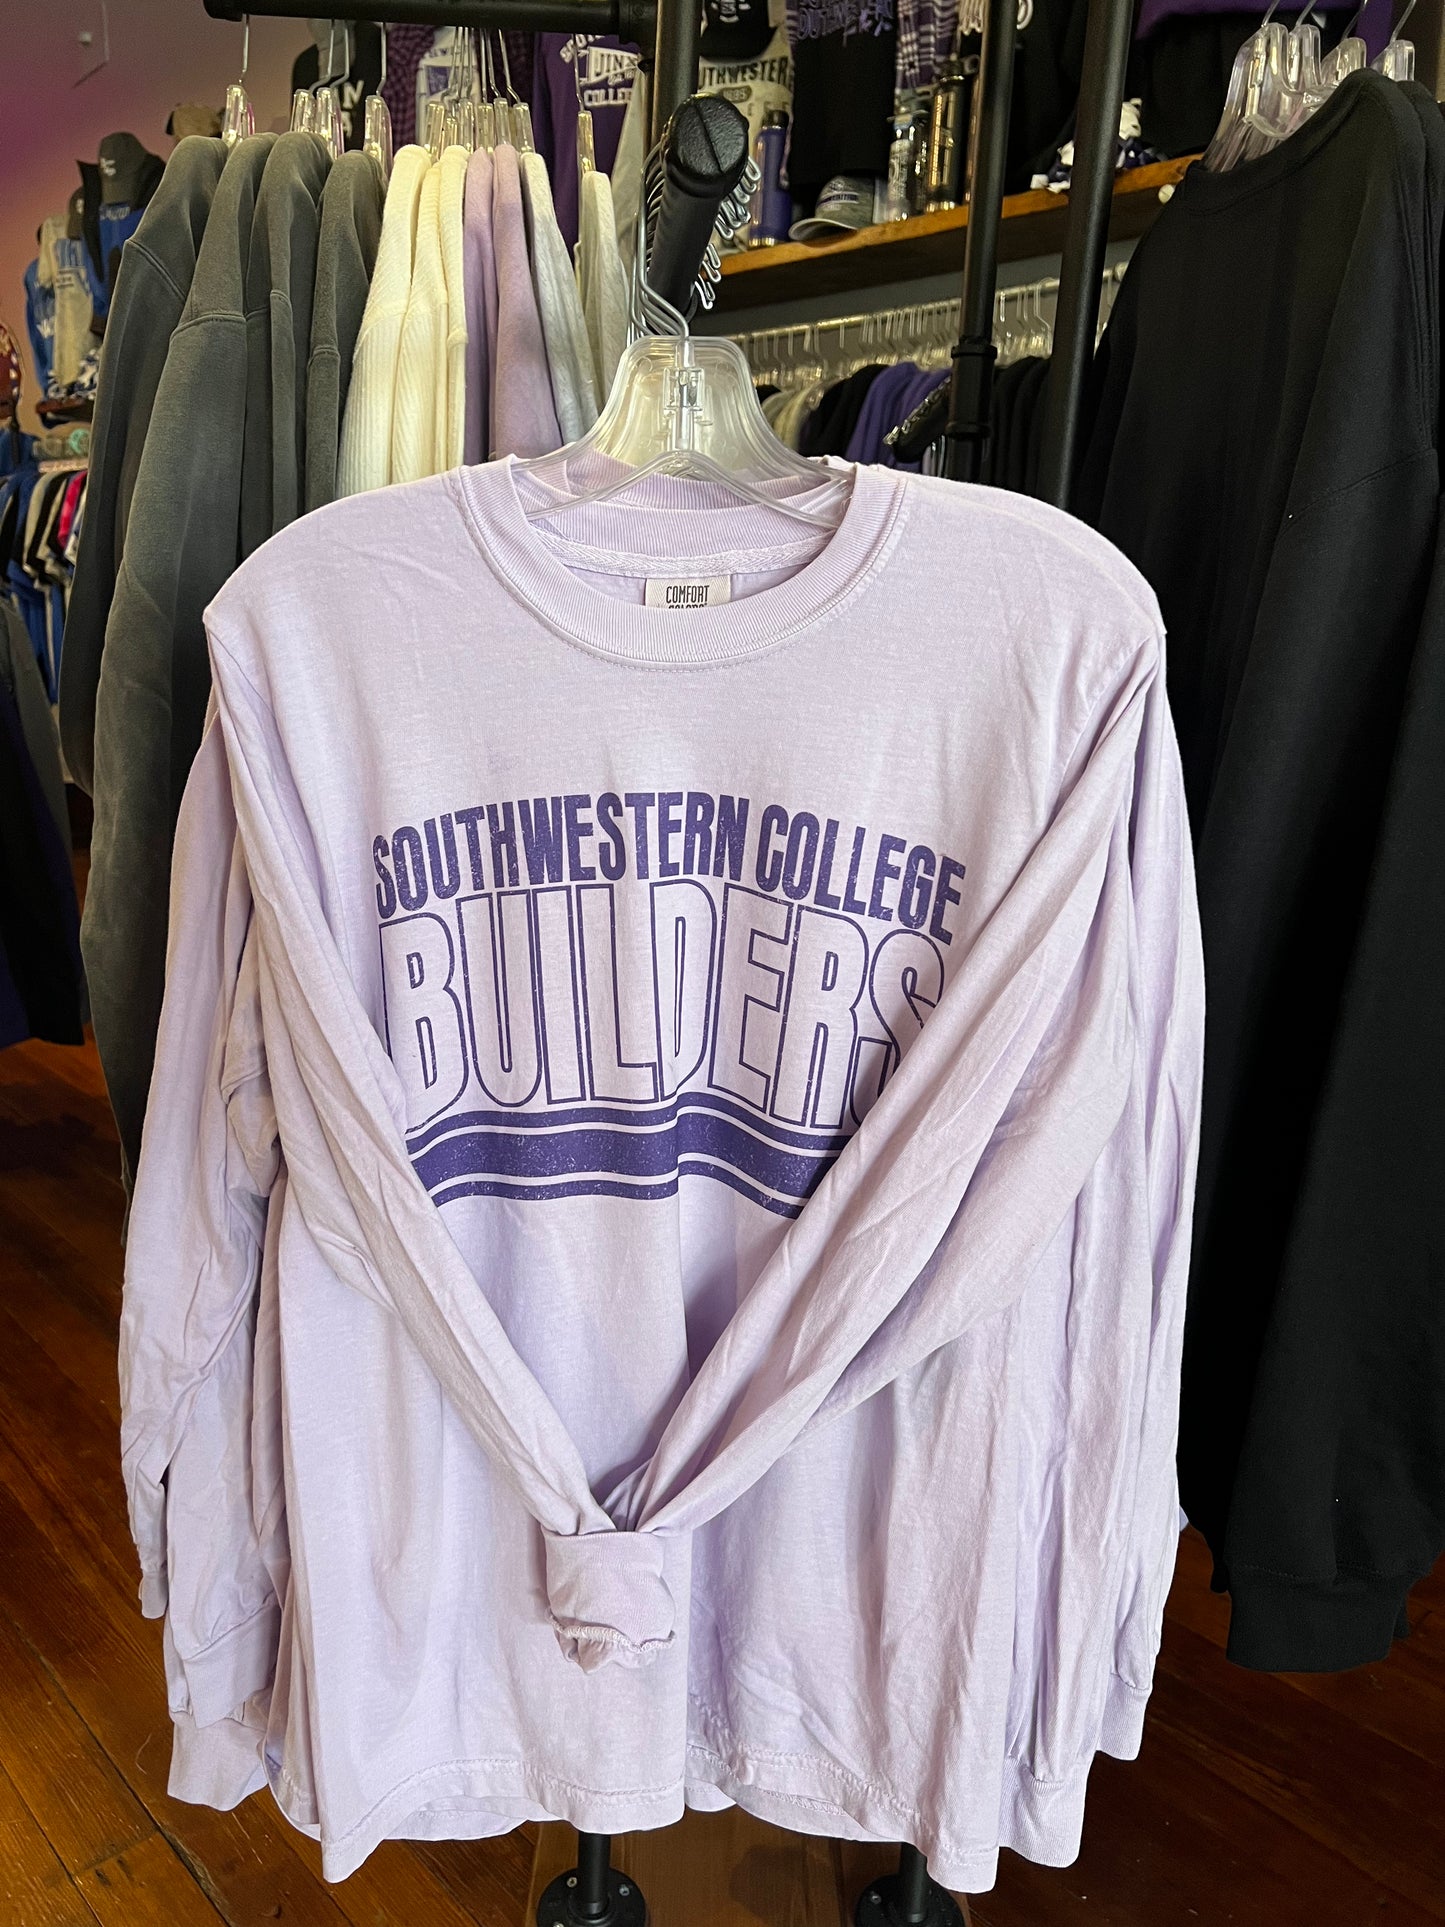 NEW!! SC Builders Tone on Tone Lavender CC Long Sleeved Tee